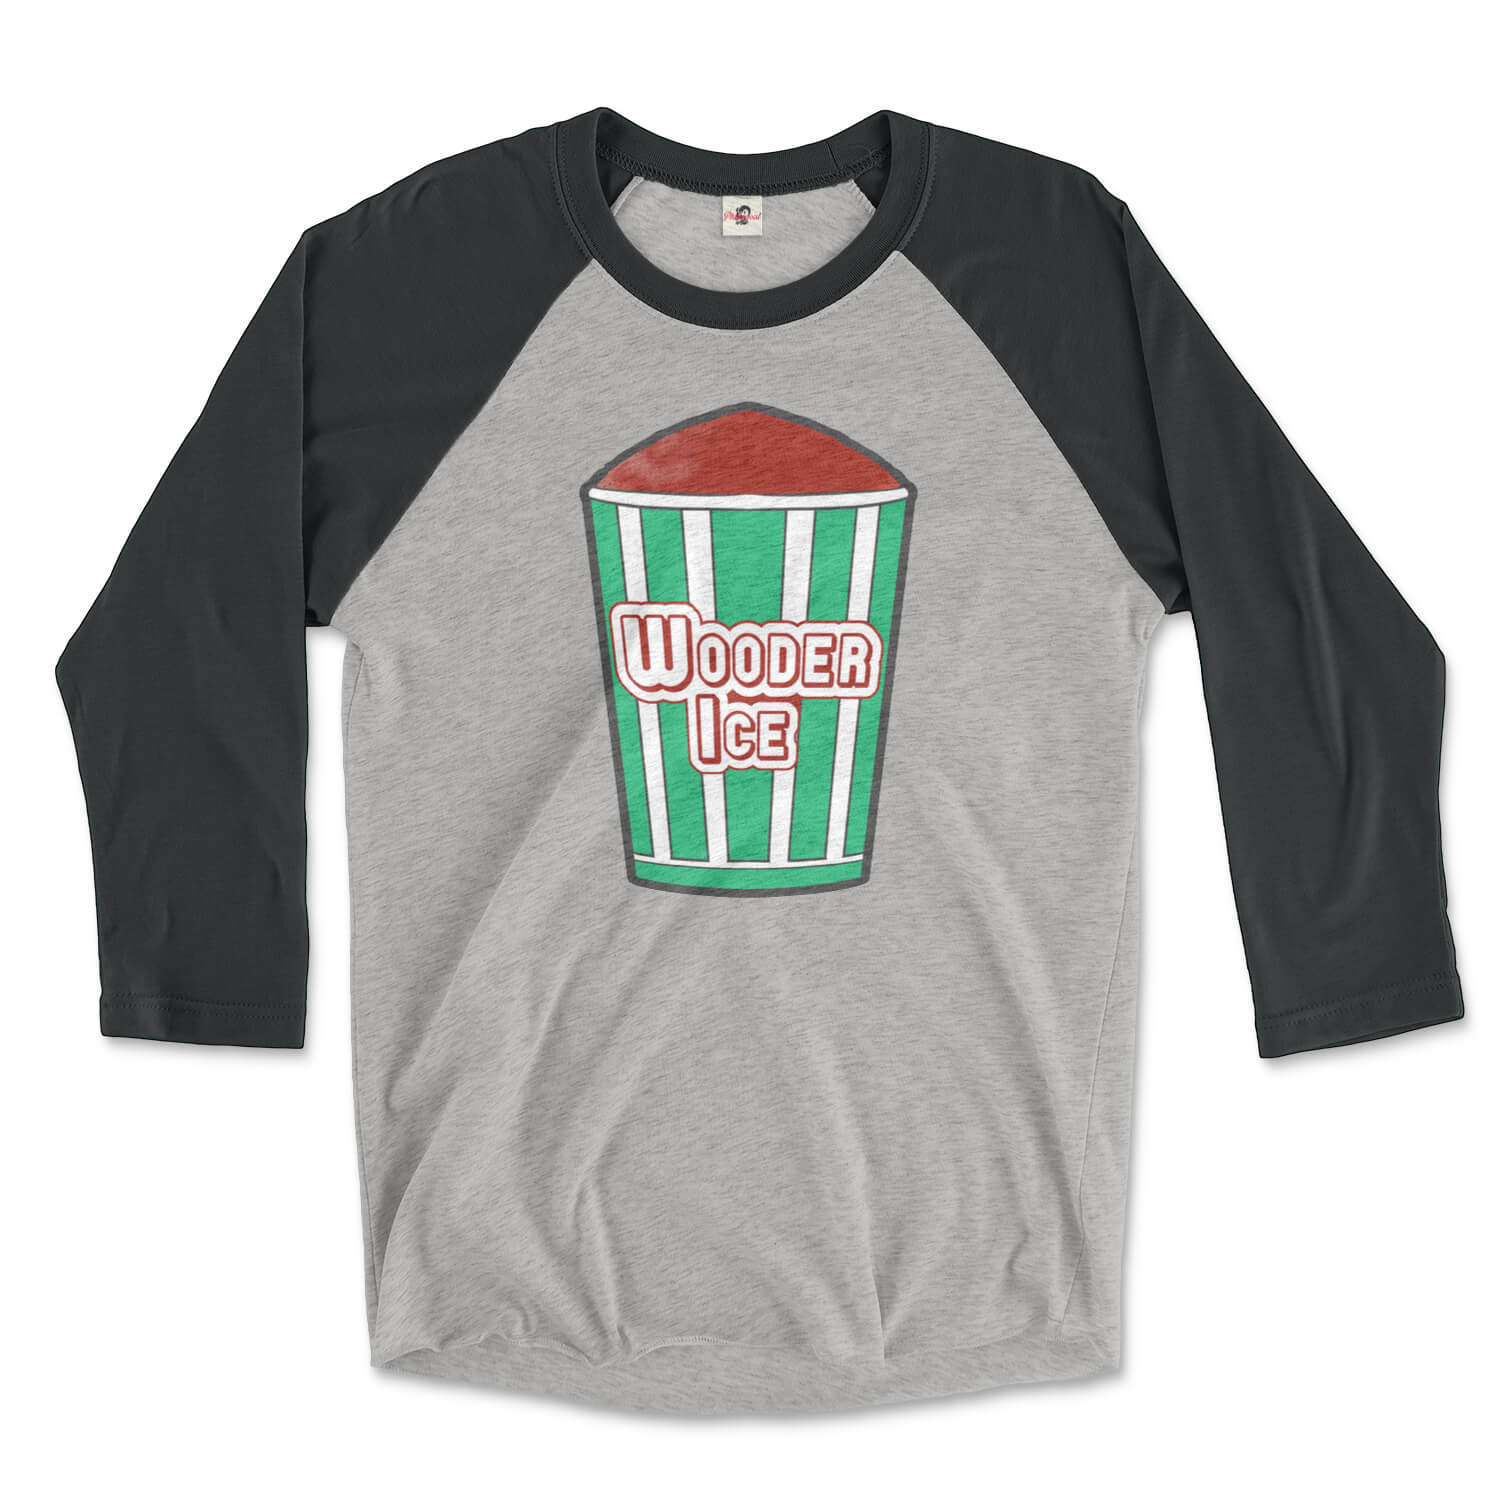 Philadelphia philly cherry italian water wooder ice design on a vintage black and premium heather grey raglan tee from Phillygoat 